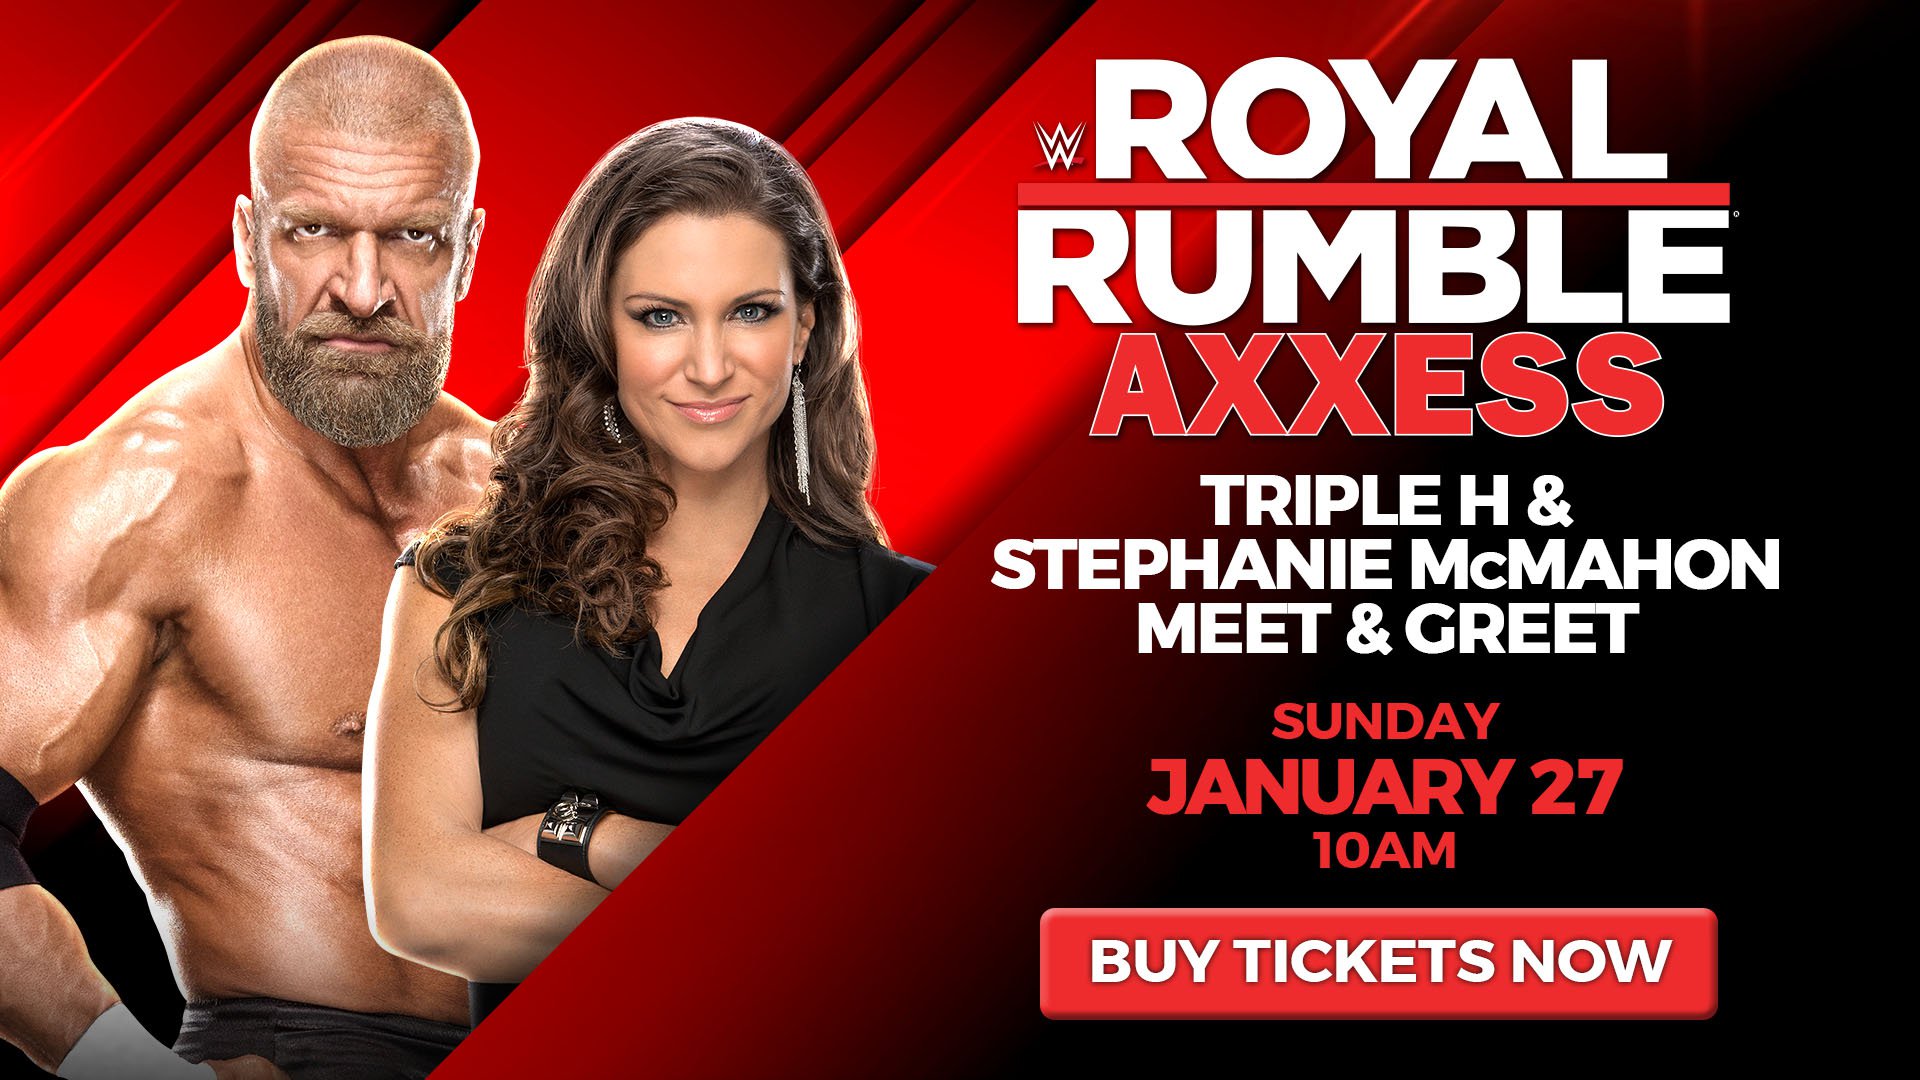 Join Triple H & Stephanie McMahon for a special VIP Royal Rumble Axxess